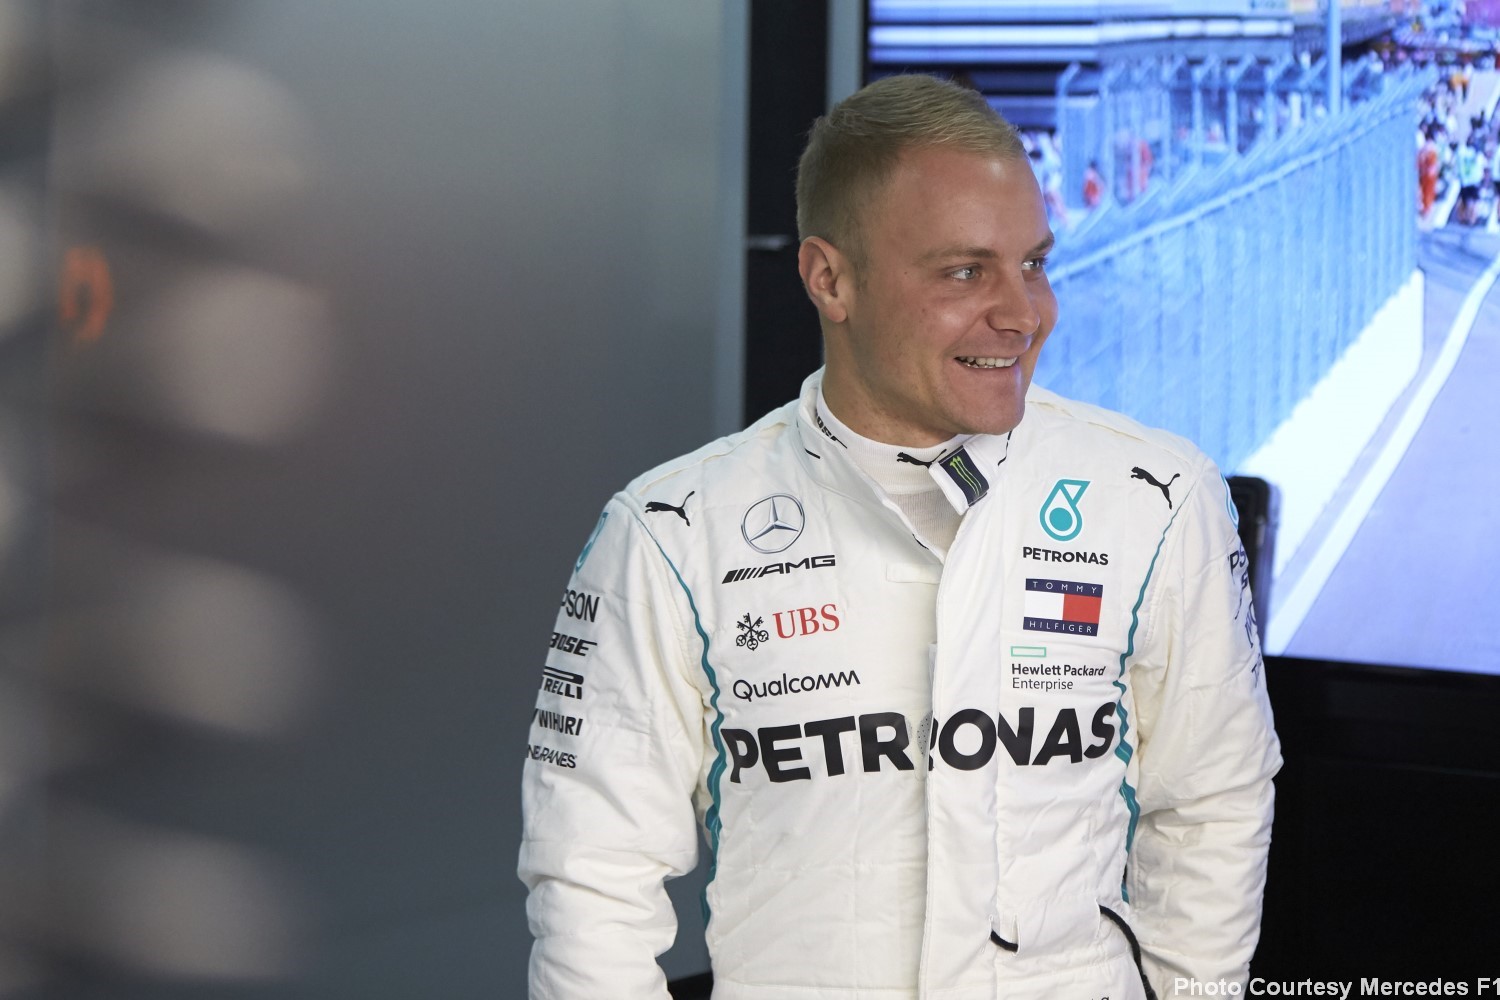 Bottas hopes for better tires. Today drivers have to drive slow so their tires do not blister